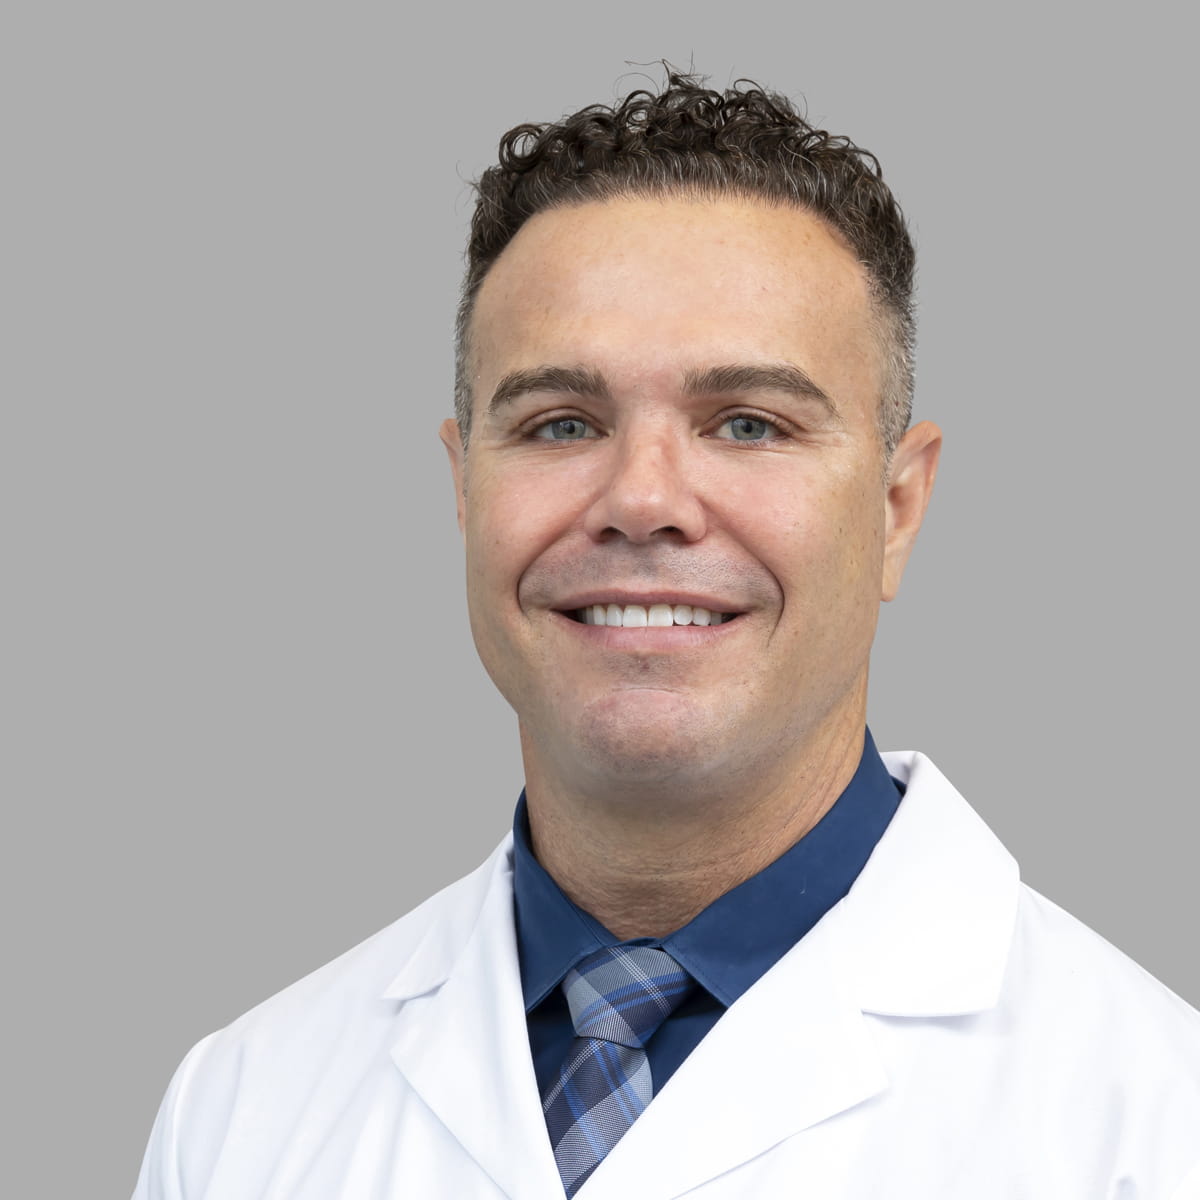 A friendly image of Michael Priola MD